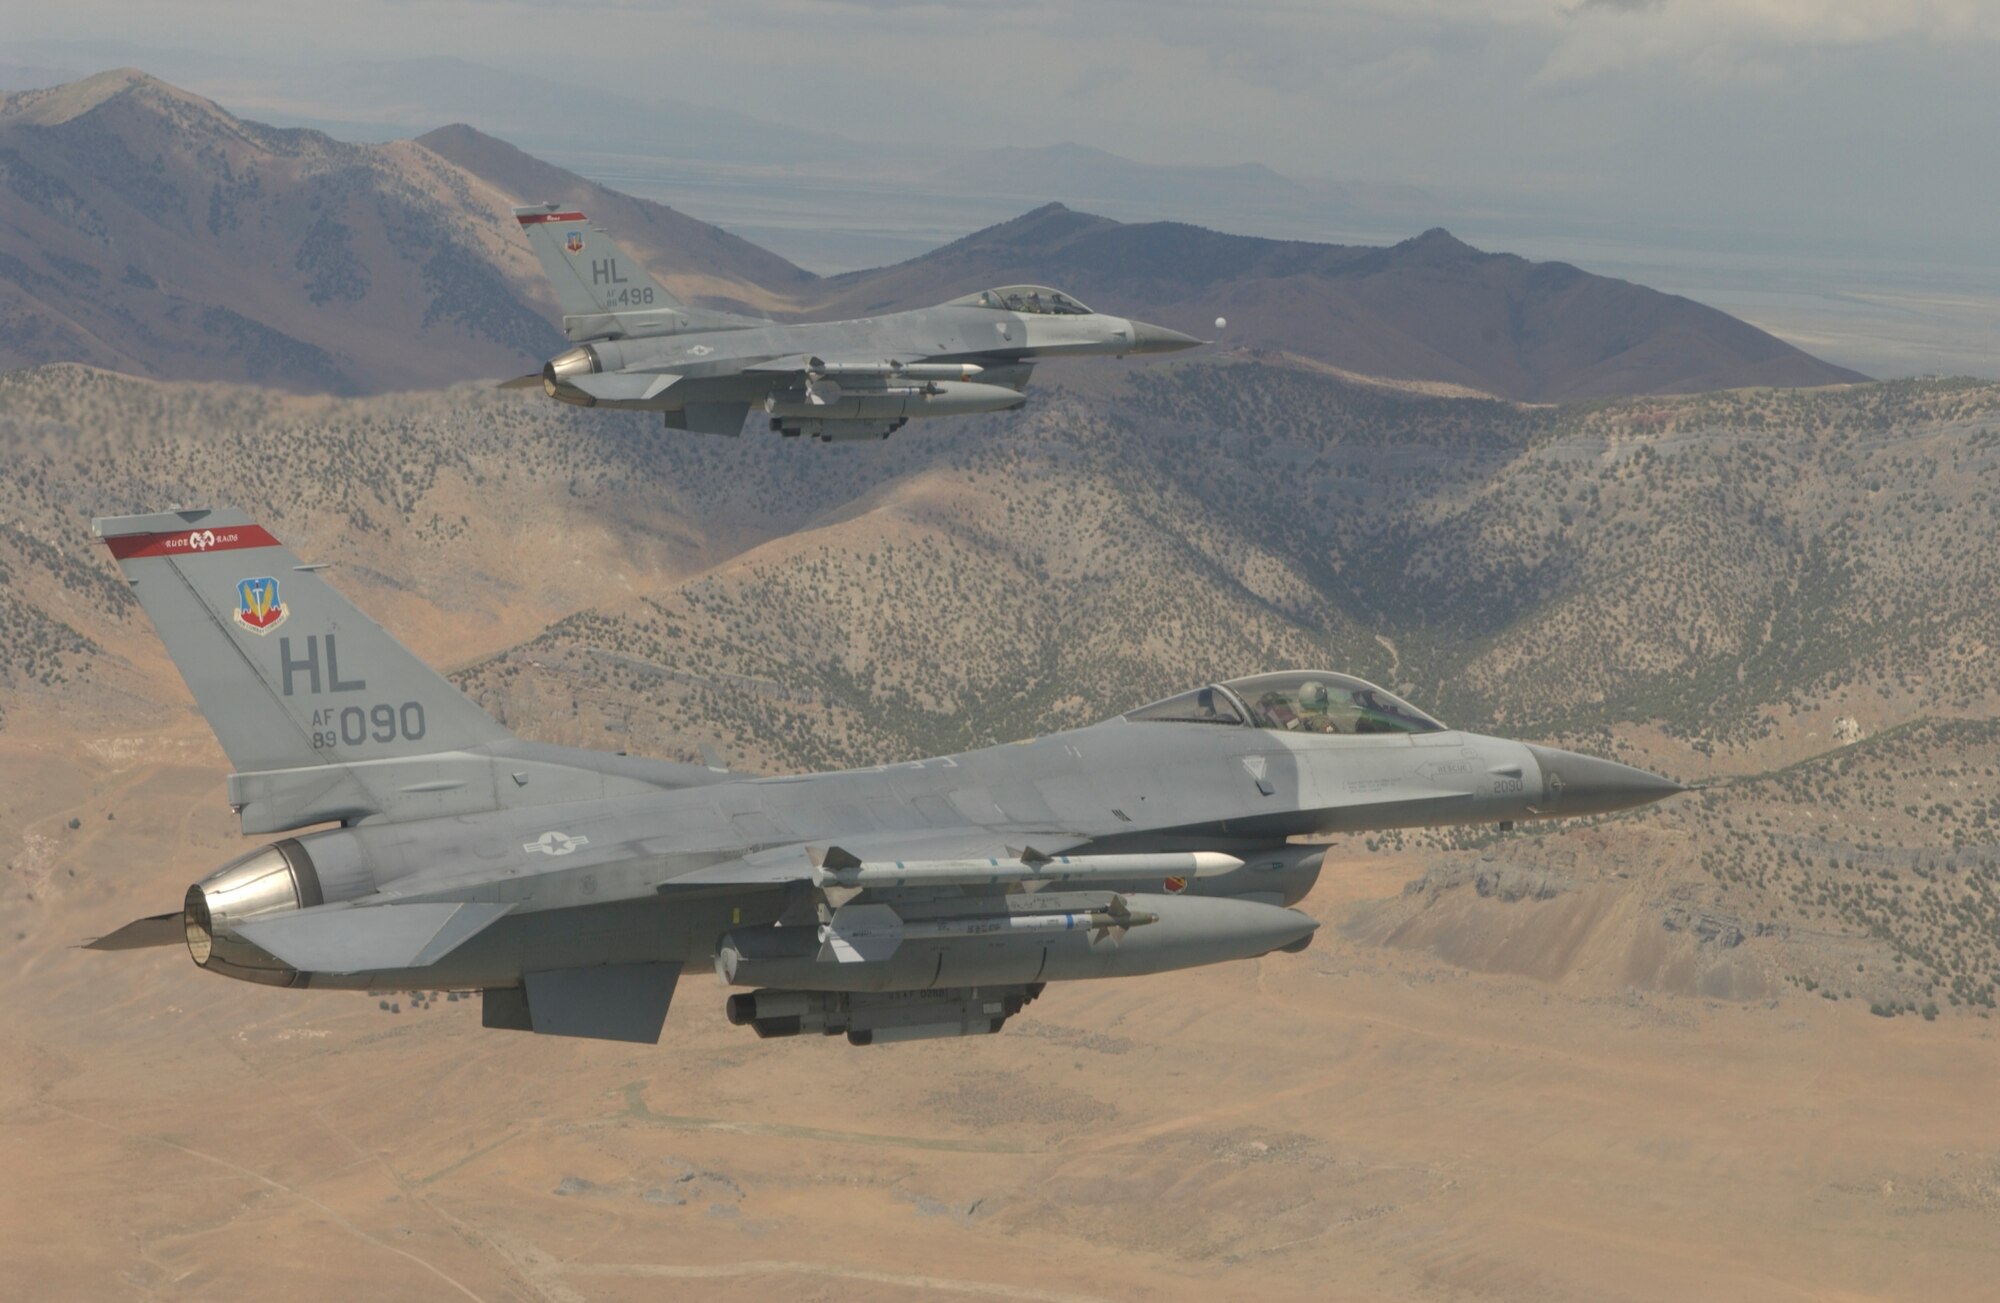 Patrolling the skies outside of Salt Lake City, Utah, a pair of F-16 Vipers, flown by 1Lt Brian "Deuce" Wilder (bottom) and Lt Col Michael "Skeeter" Rothstein (top) have played a vital role in the nation's Homeland Defense mission by providing nonstop aerial deterance over the U.S. capitol in Washington, DC, as well as securing the skies around Salt Lake city during the 2002 Olympic Games. The F-16's are based out of the 34th Fighter Squadron at Hill AFB, Utah.